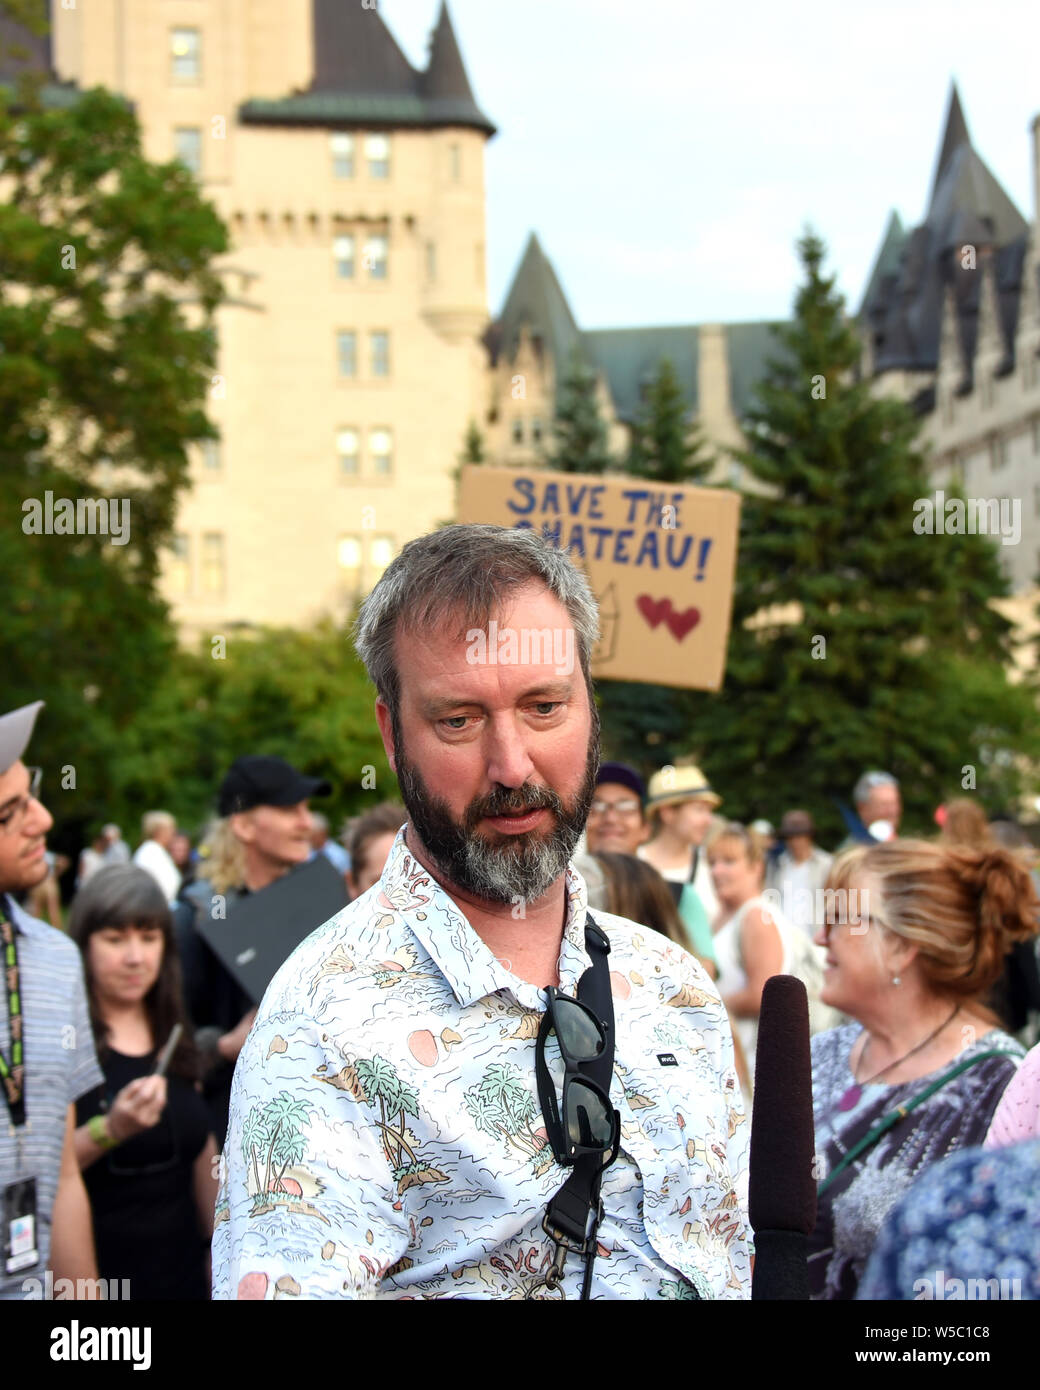 Ottawa, Canada - July 27, 2019:  Ottawa born comedian Tom Green at the rally he invited the public to join in an effort to prevent a proposed addition to the Chateau Laurier that many people feel is not appropriate for the iconic hotel as seen in the background.  He has been raising awareness for the issue on social media. Stock Photo